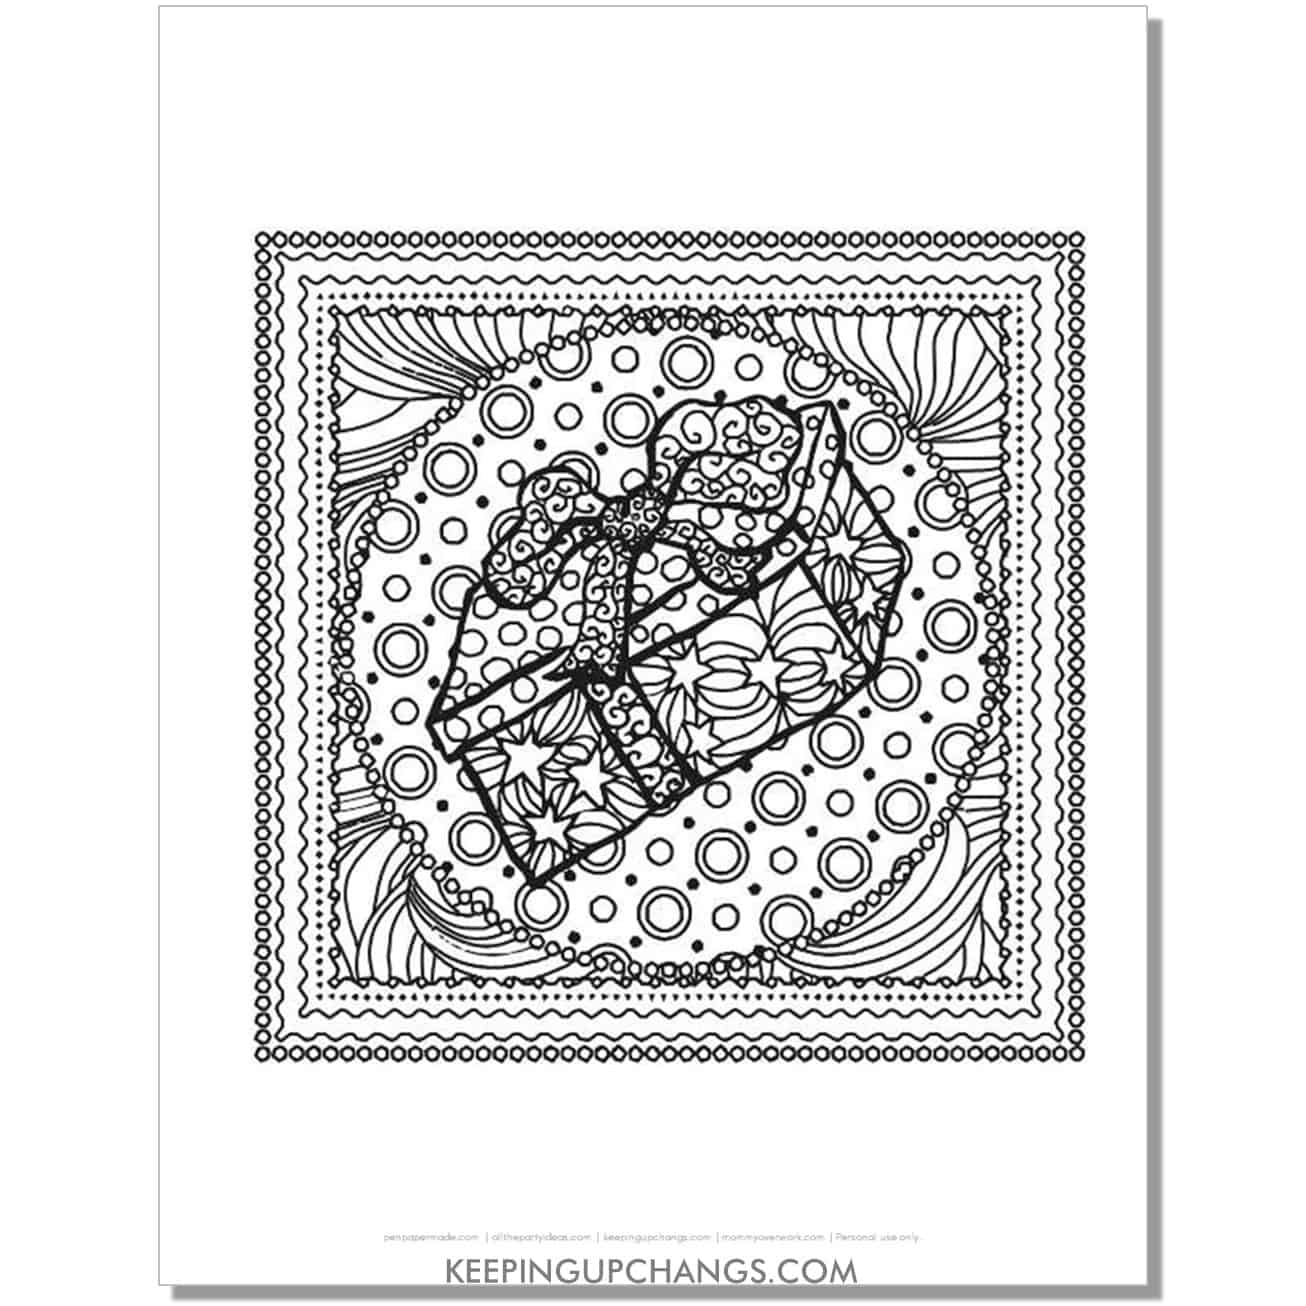 free gift present on detailed background adult christmas coloring page.